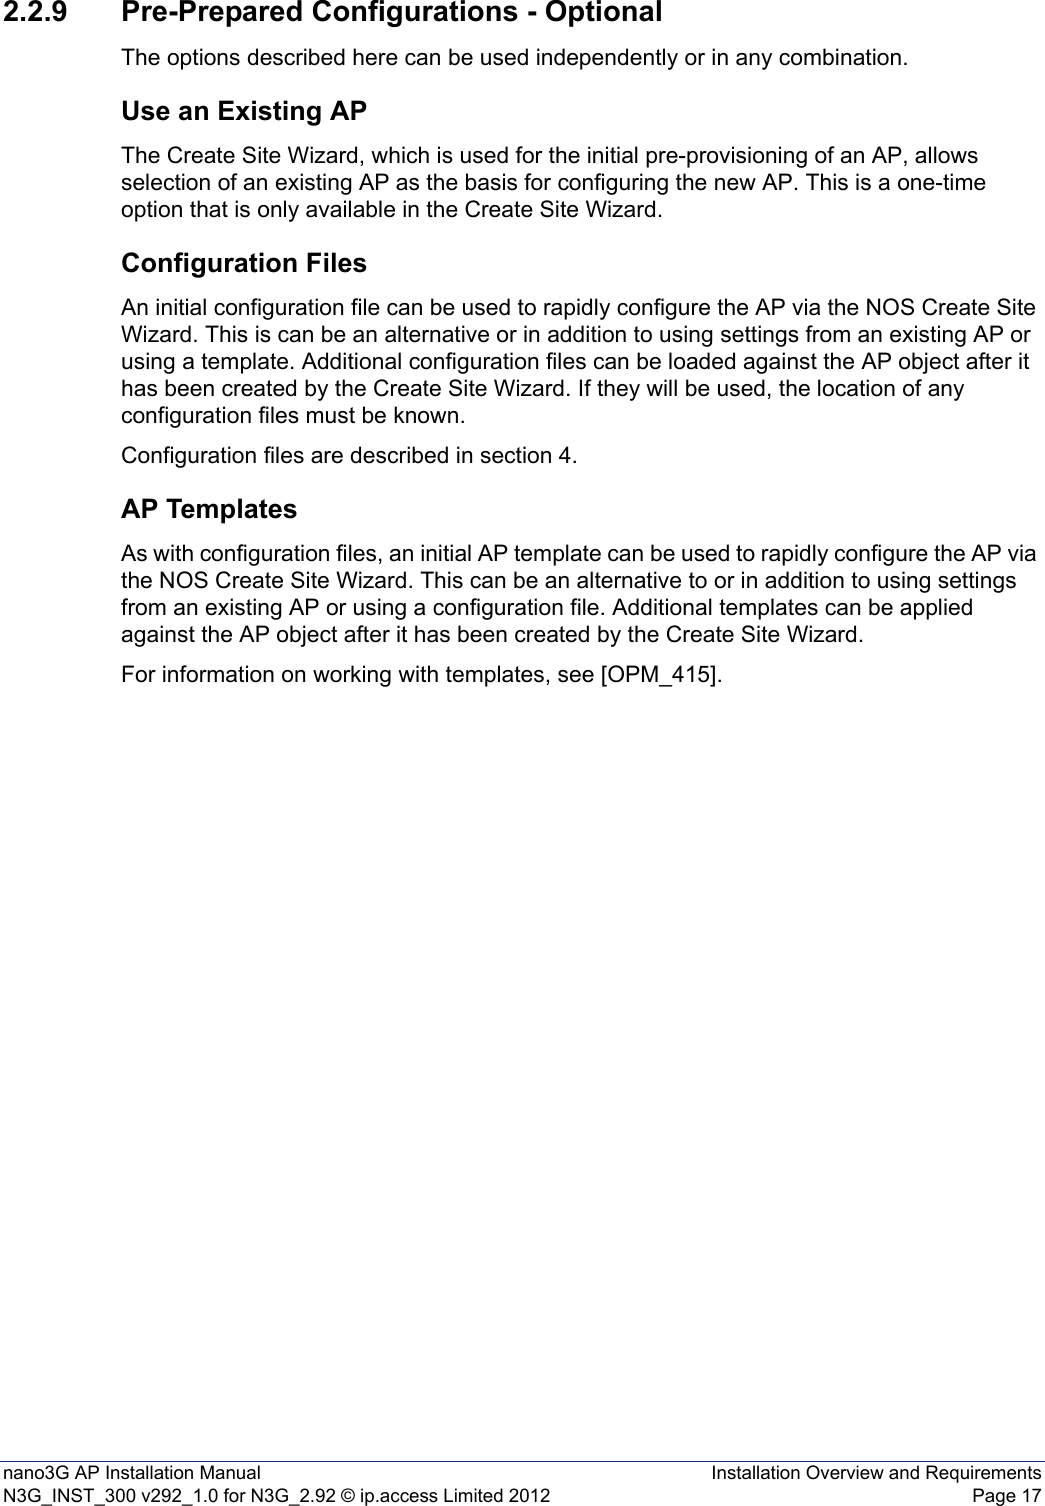 nano3G AP Installation Manual Installation Overview and RequirementsN3G_INST_300 v292_1.0 for N3G_2.92 © ip.access Limited 2012 Page 172.2.9 Pre-Prepared Configurations - OptionalThe options described here can be used independently or in any combination.Use an Existing APThe Create Site Wizard, which is used for the initial pre-provisioning of an AP, allows selection of an existing AP as the basis for configuring the new AP. This is a one-time option that is only available in the Create Site Wizard. Configuration FilesAn initial configuration file can be used to rapidly configure the AP via the NOS Create Site Wizard. This is can be an alternative or in addition to using settings from an existing AP or using a template. Additional configuration files can be loaded against the AP object after it has been created by the Create Site Wizard. If they will be used, the location of any configuration files must be known. Configuration files are described in section 4.AP TemplatesAs with configuration files, an initial AP template can be used to rapidly configure the AP via the NOS Create Site Wizard. This can be an alternative to or in addition to using settings from an existing AP or using a configuration file. Additional templates can be applied against the AP object after it has been created by the Create Site Wizard. For information on working with templates, see [OPM_415].